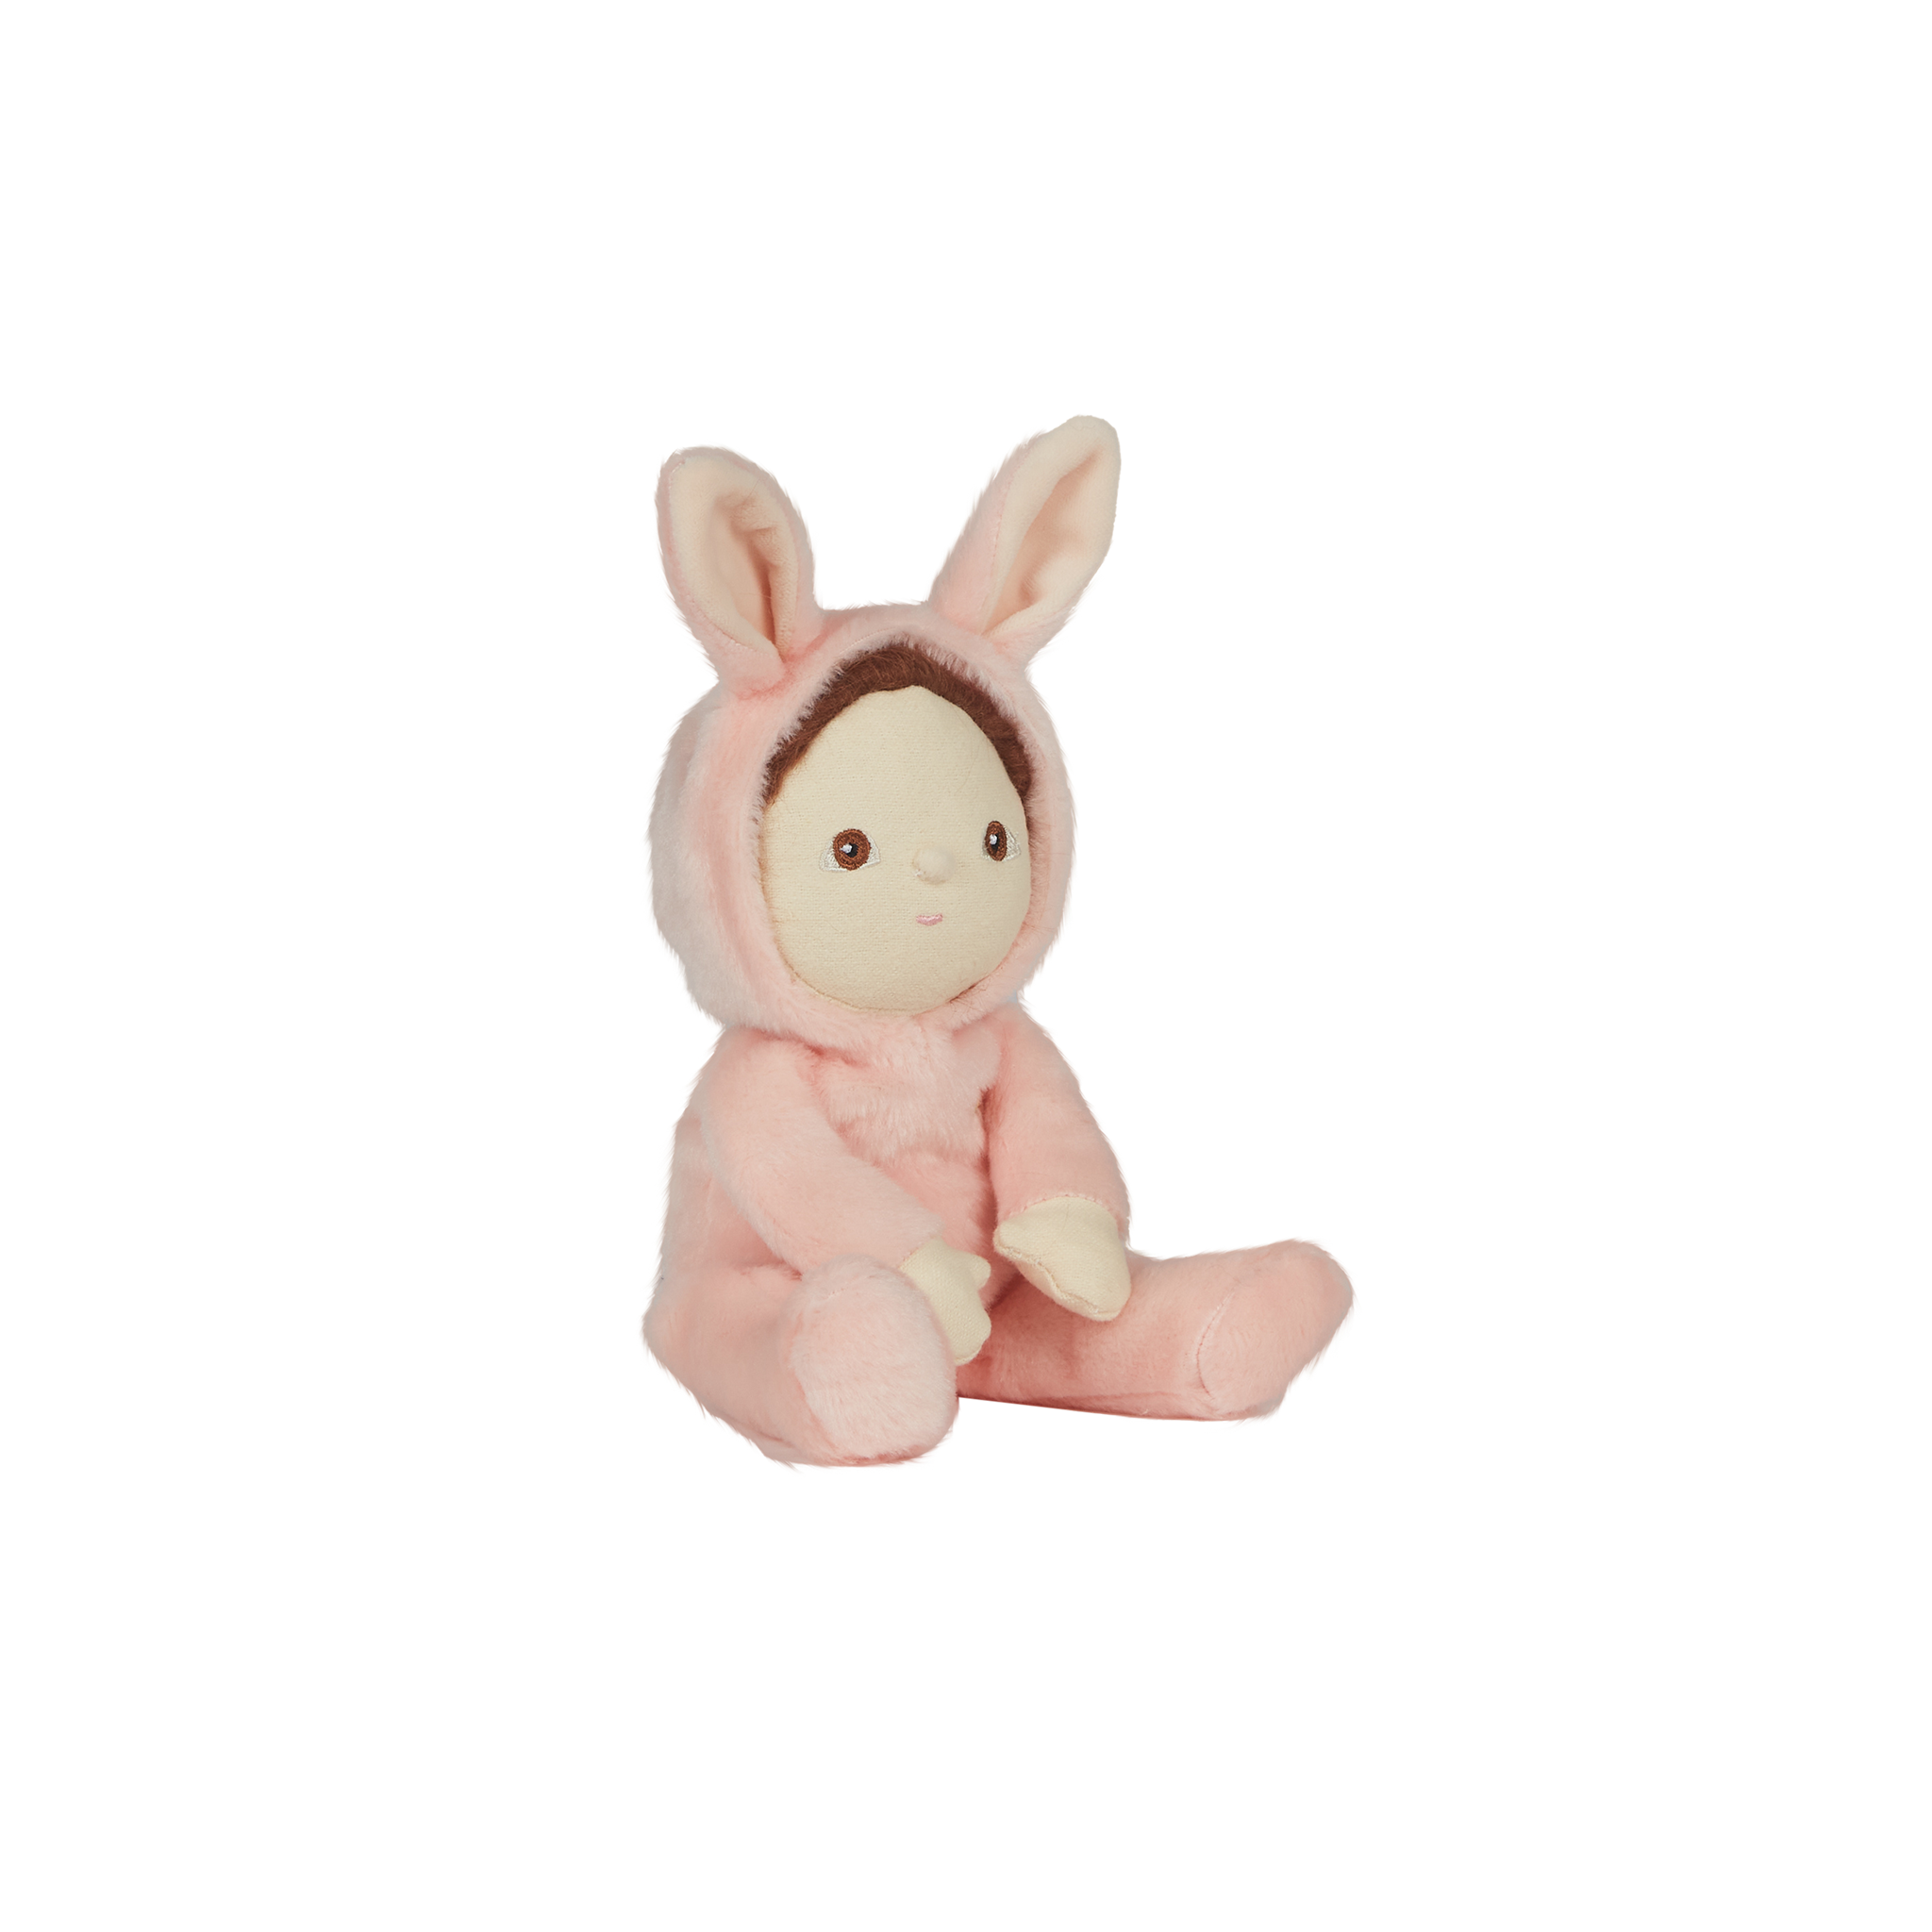 Dinky Dinkums - Fluffle Family - Bella Bunny - Rose Pink